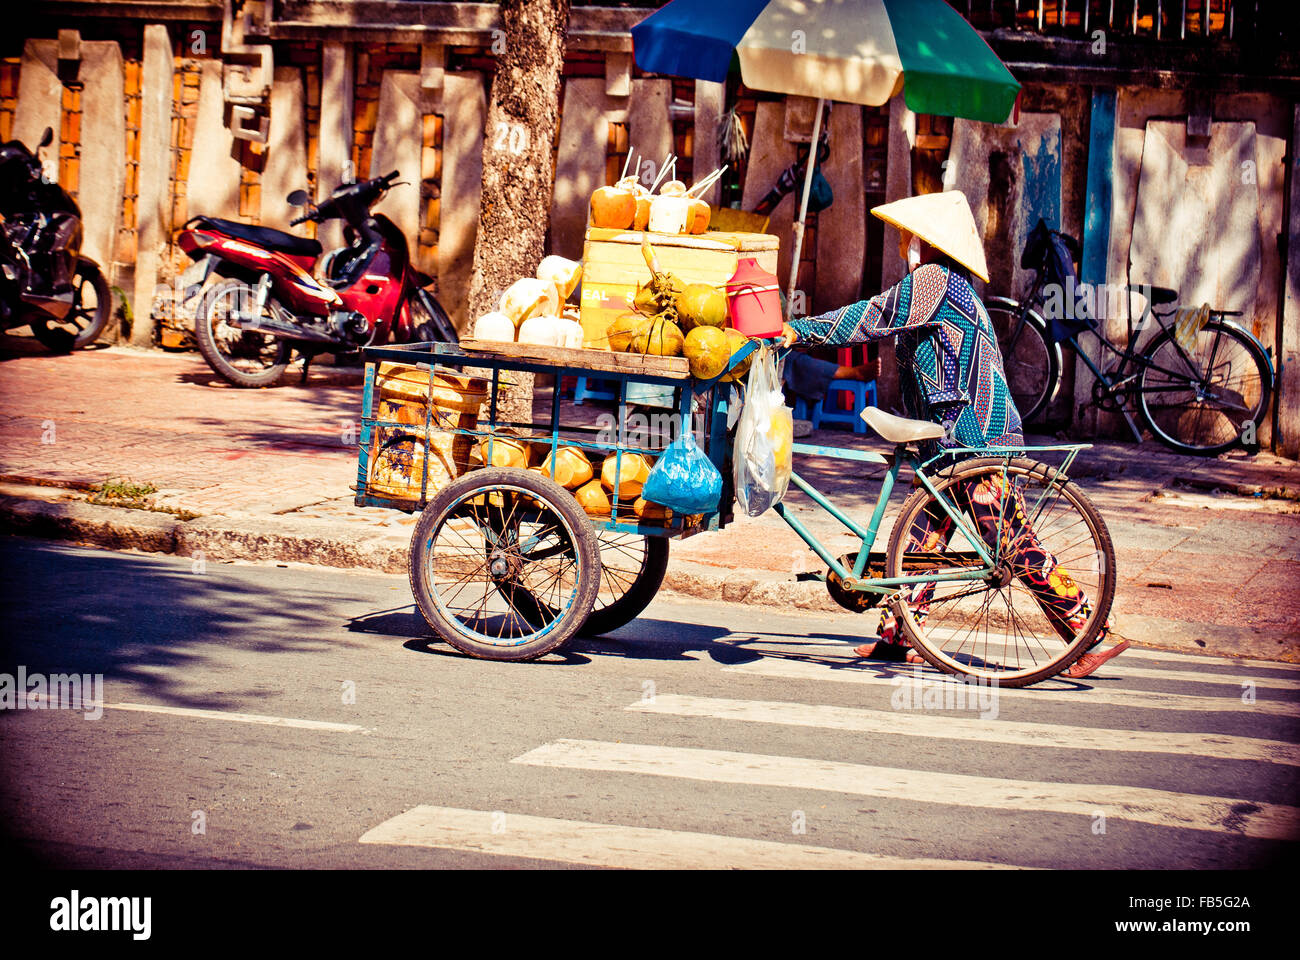 Lady pushing a cart in Vietnam. Stock Photo